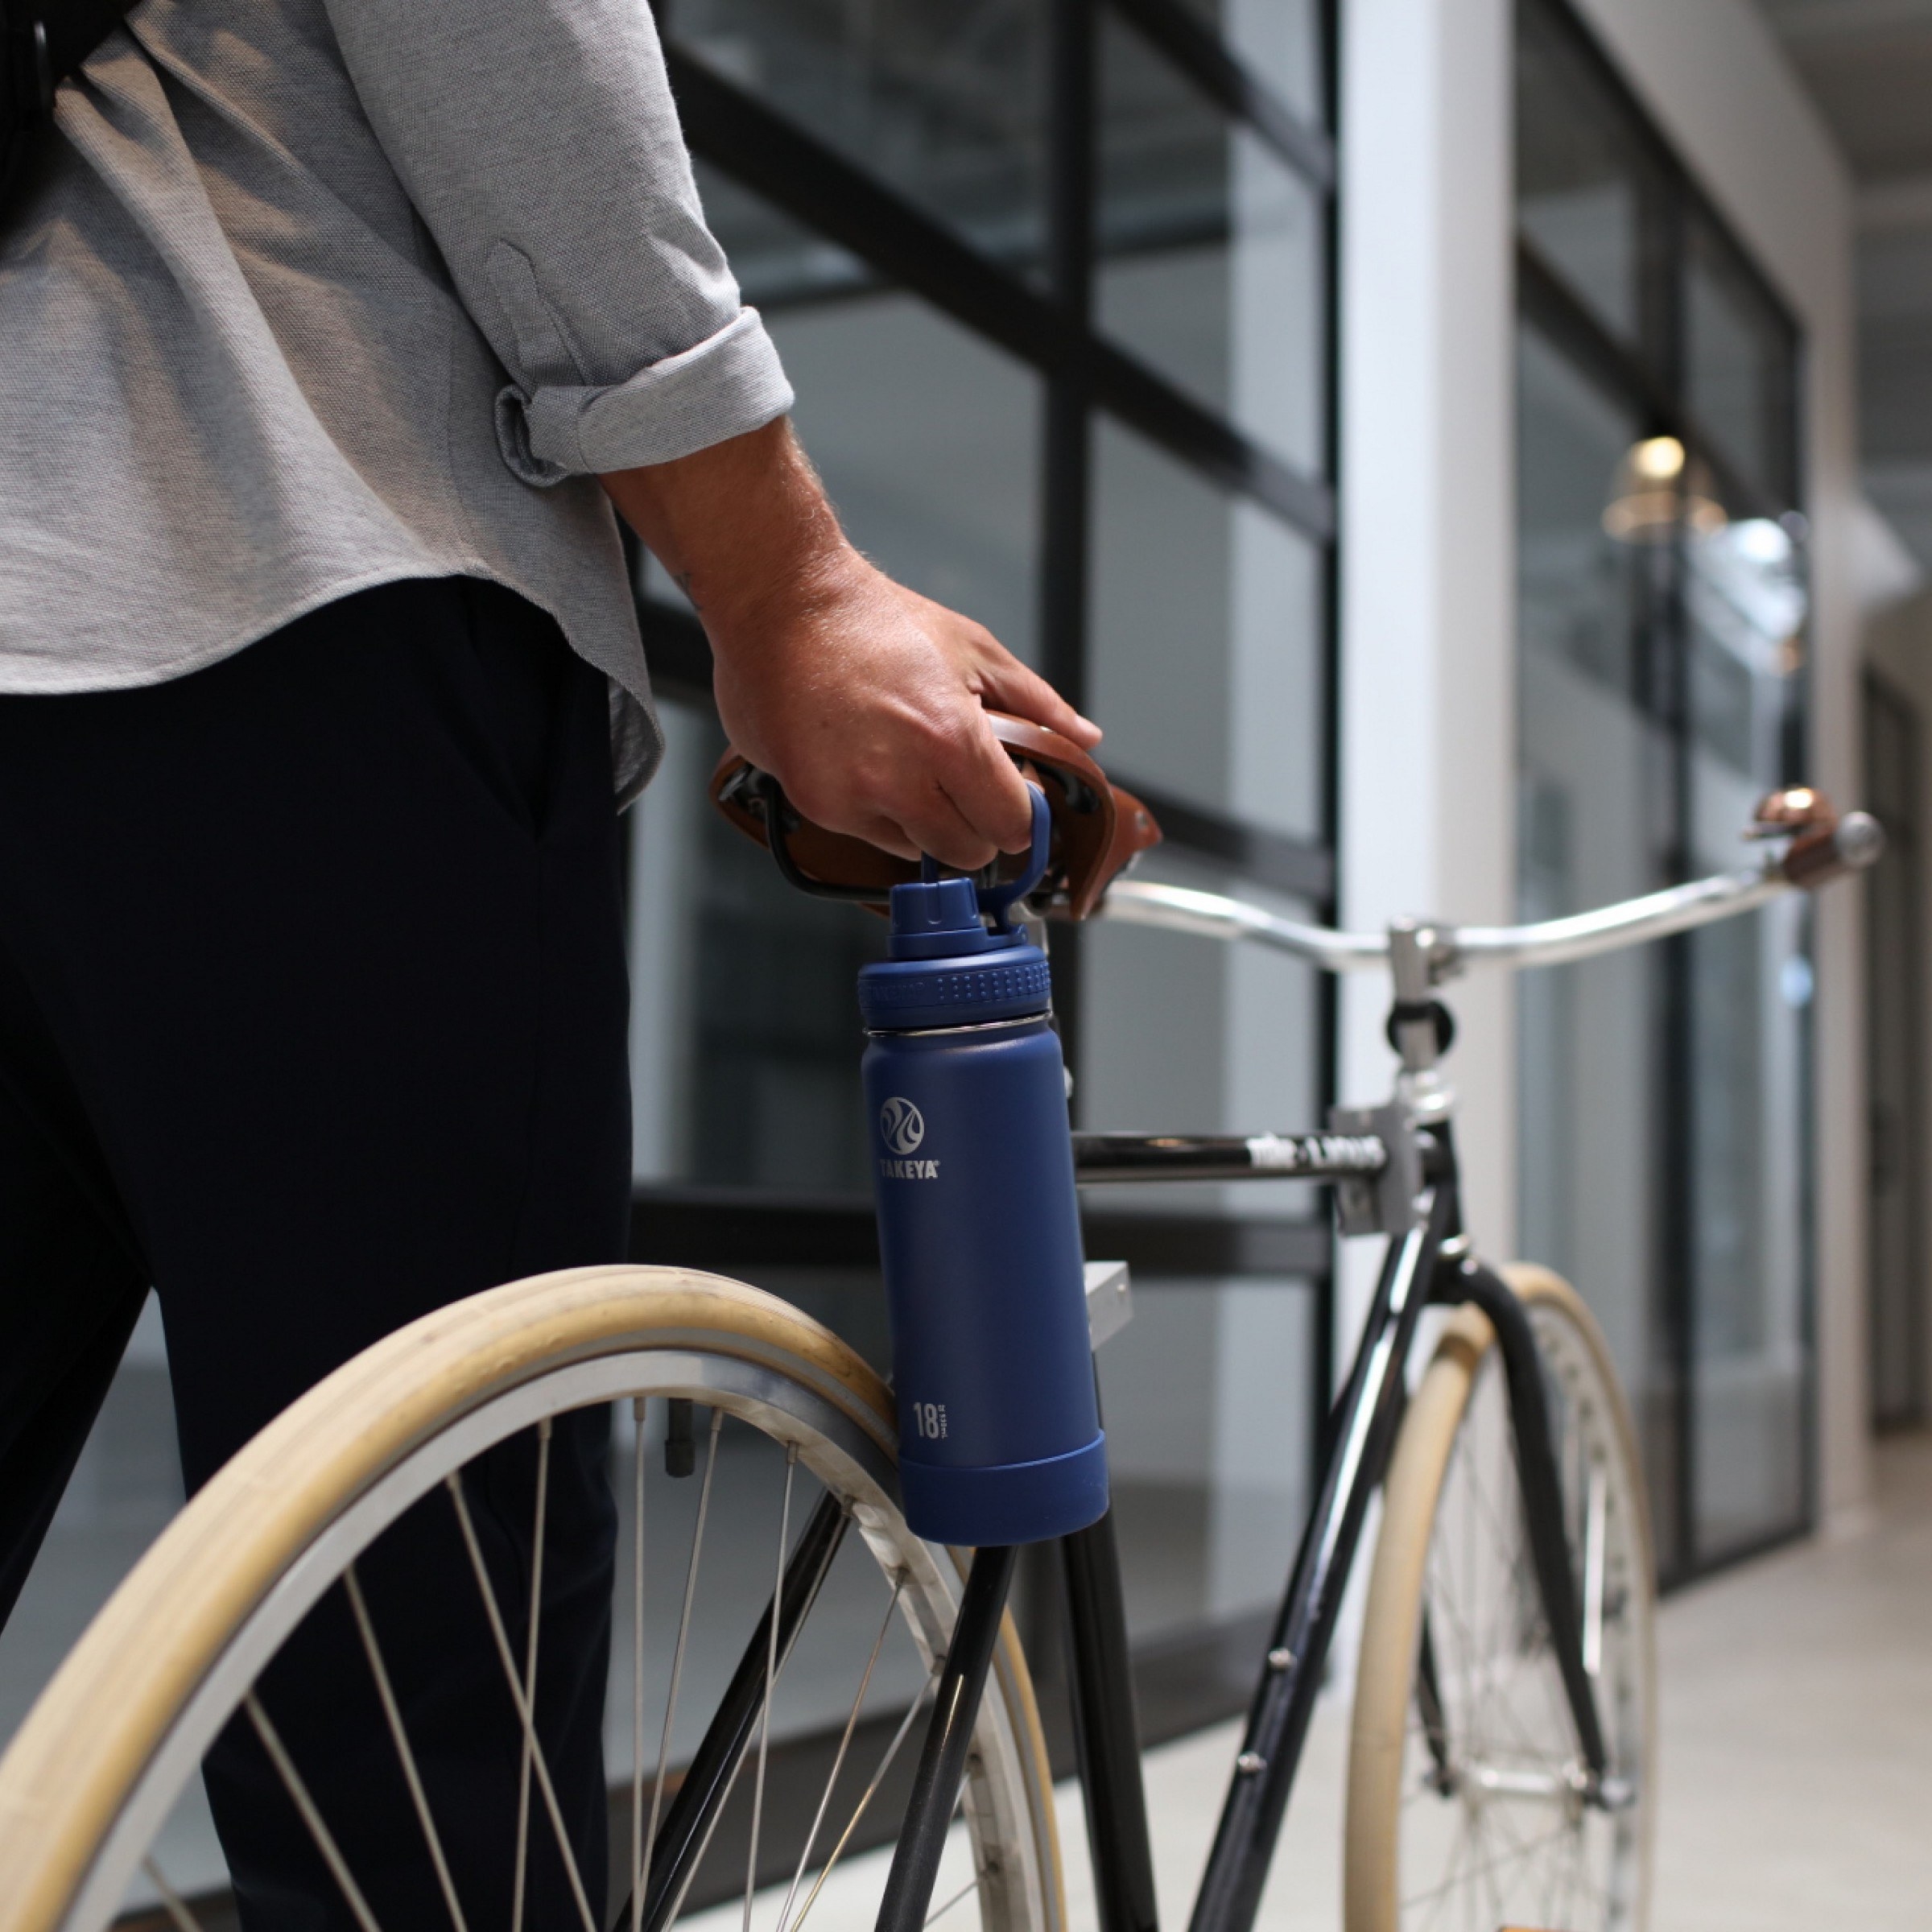 a model carrying the navy blue bottle while waking a bicycle